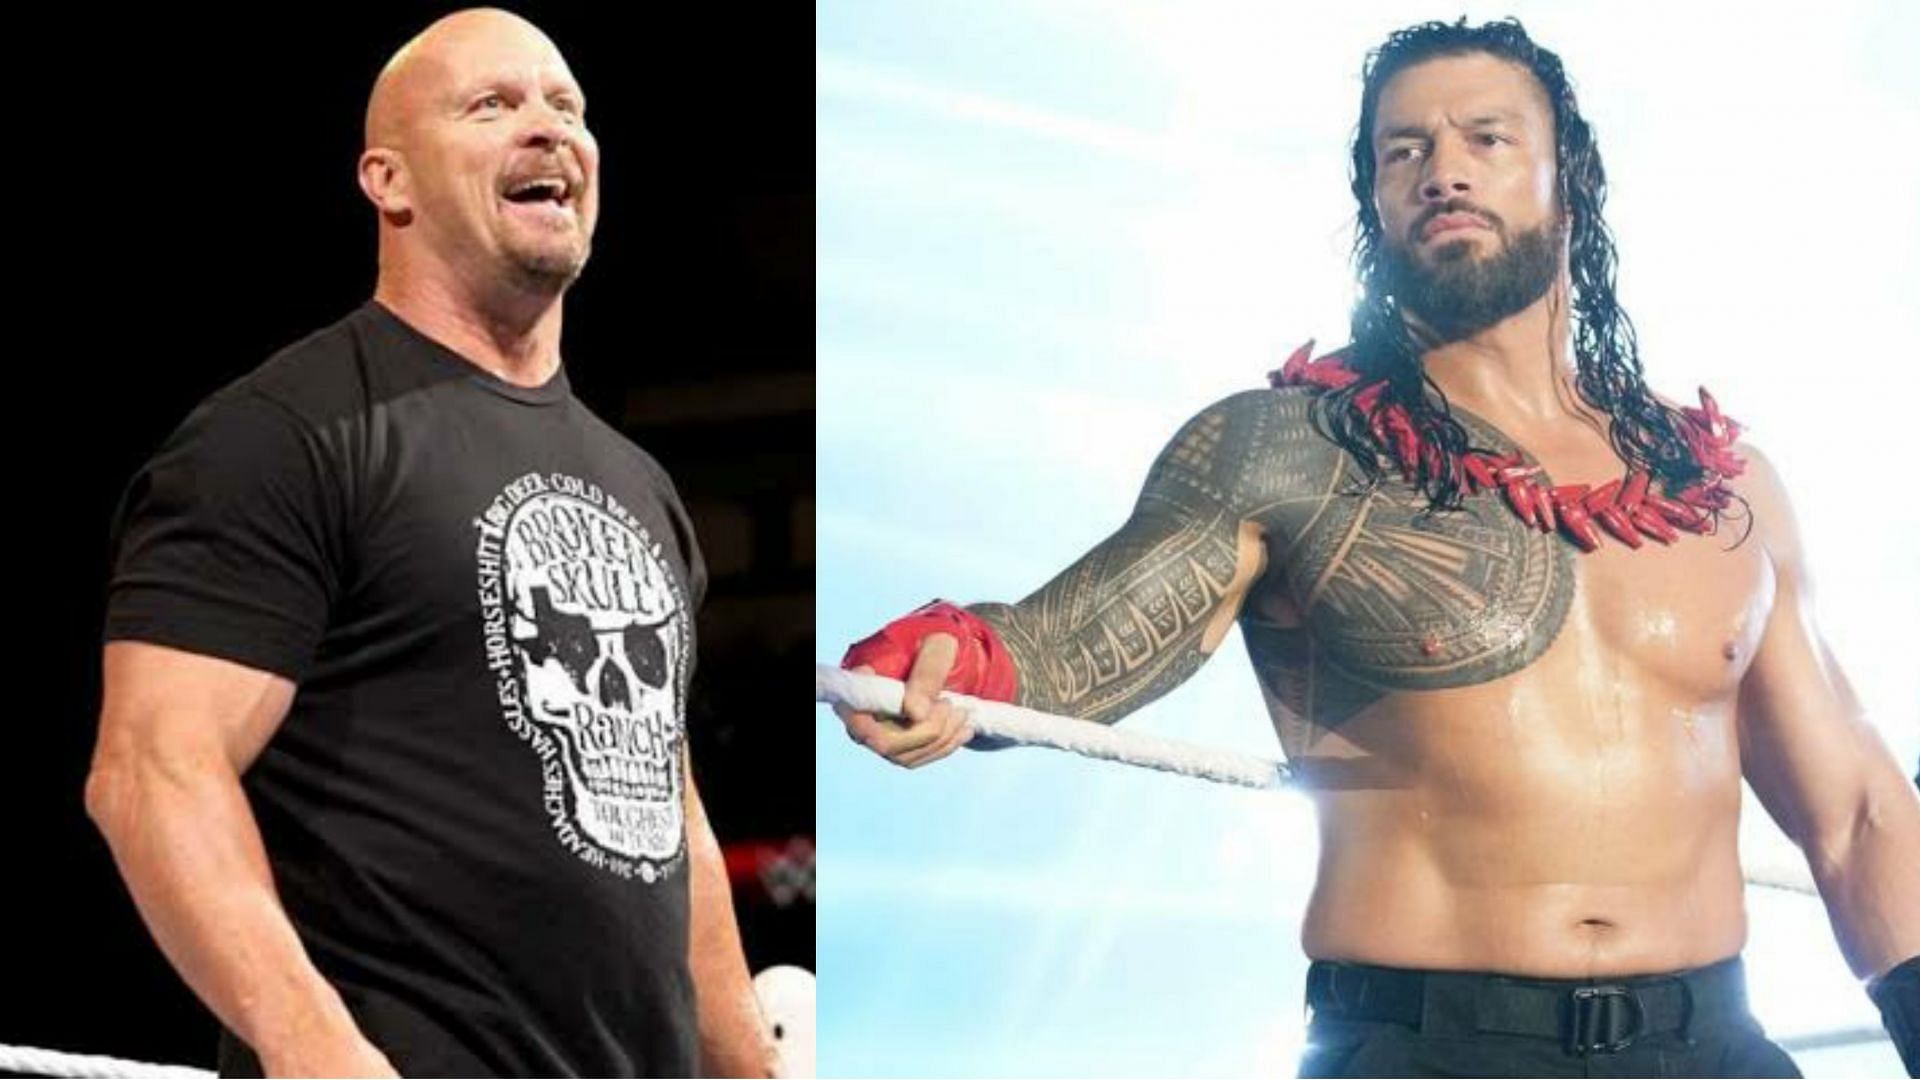 Steve Austin and Roman Reigns could be on the same WrestleMania card.